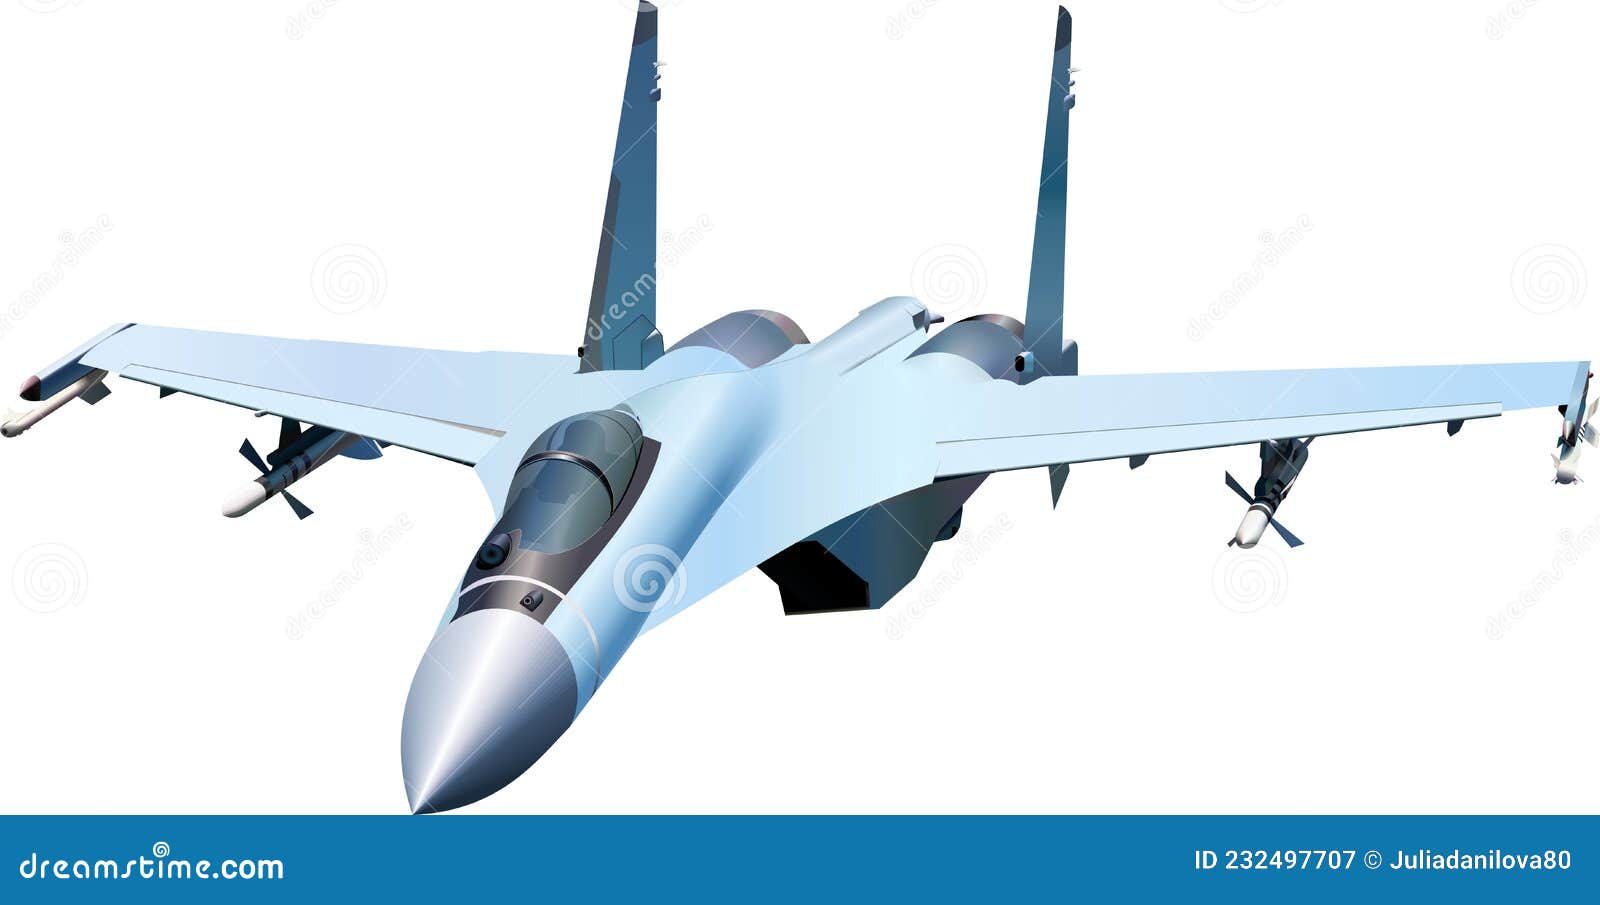 su-35 is a russian multipurpose super maneuverable fighter with a controlled thrust  on a white background.